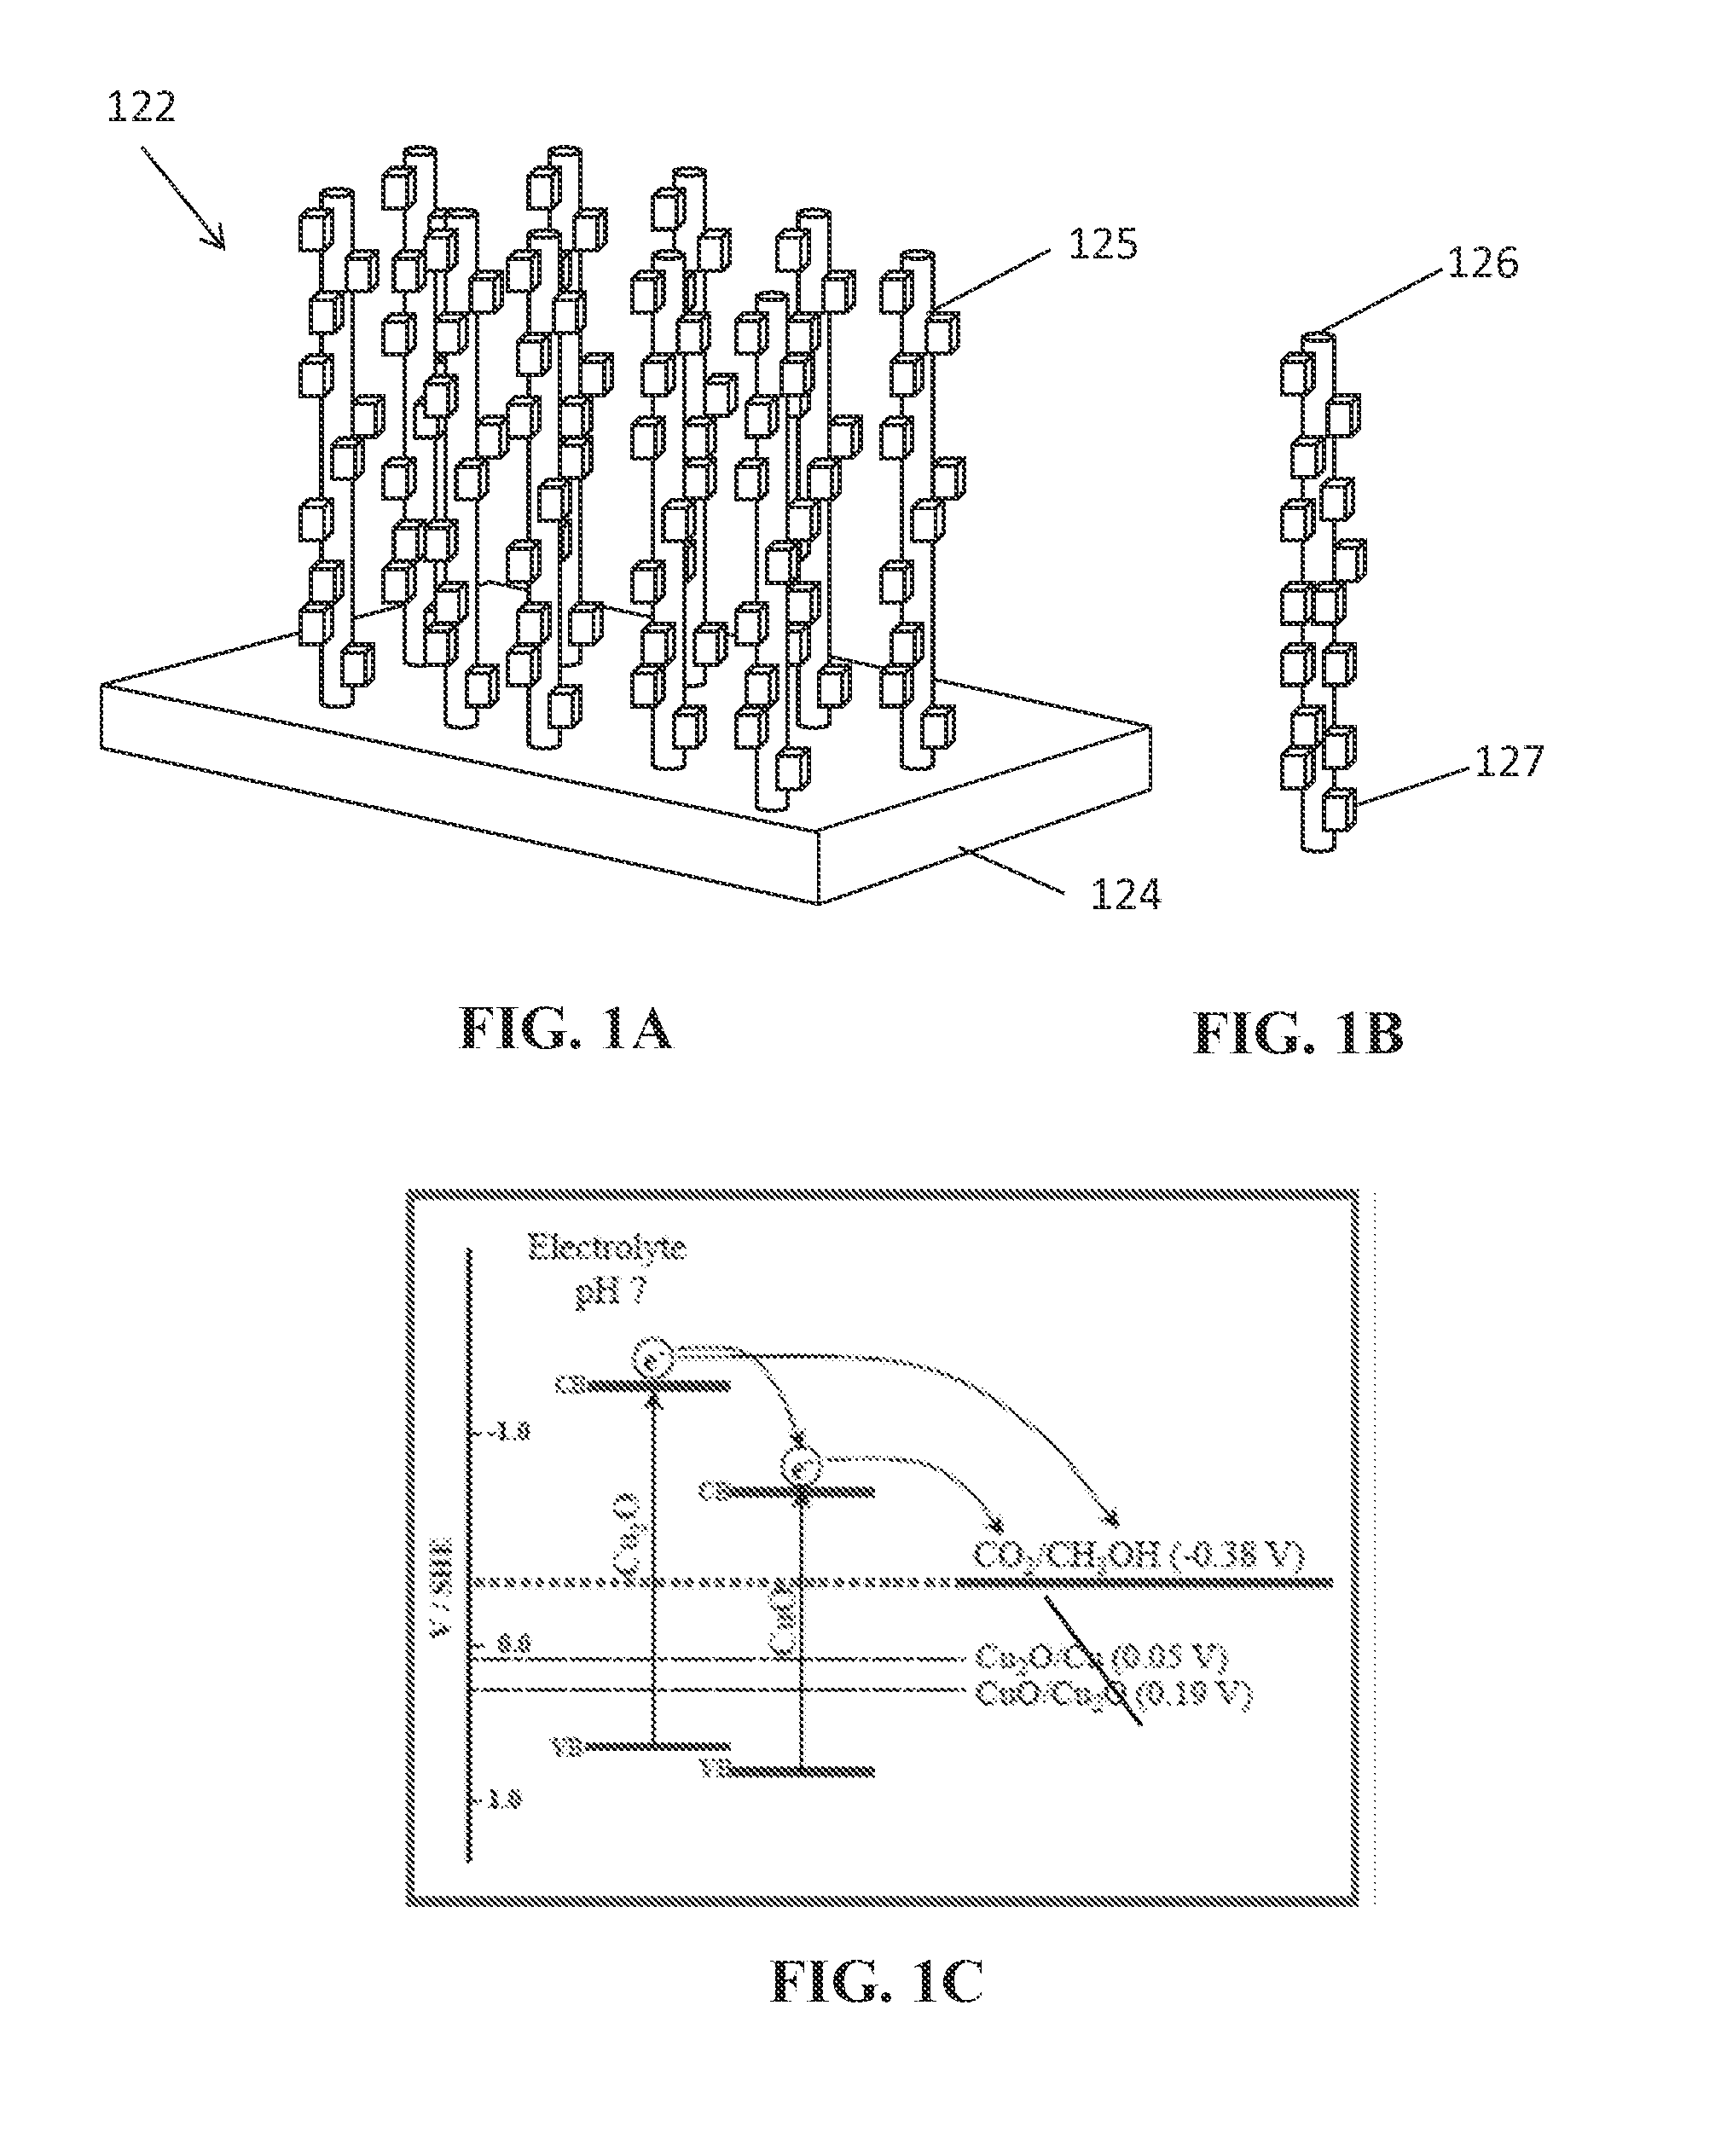 Photoelectrochemical devices, methods, and systems with a cupric oxide/cuprous oxide coated electrode